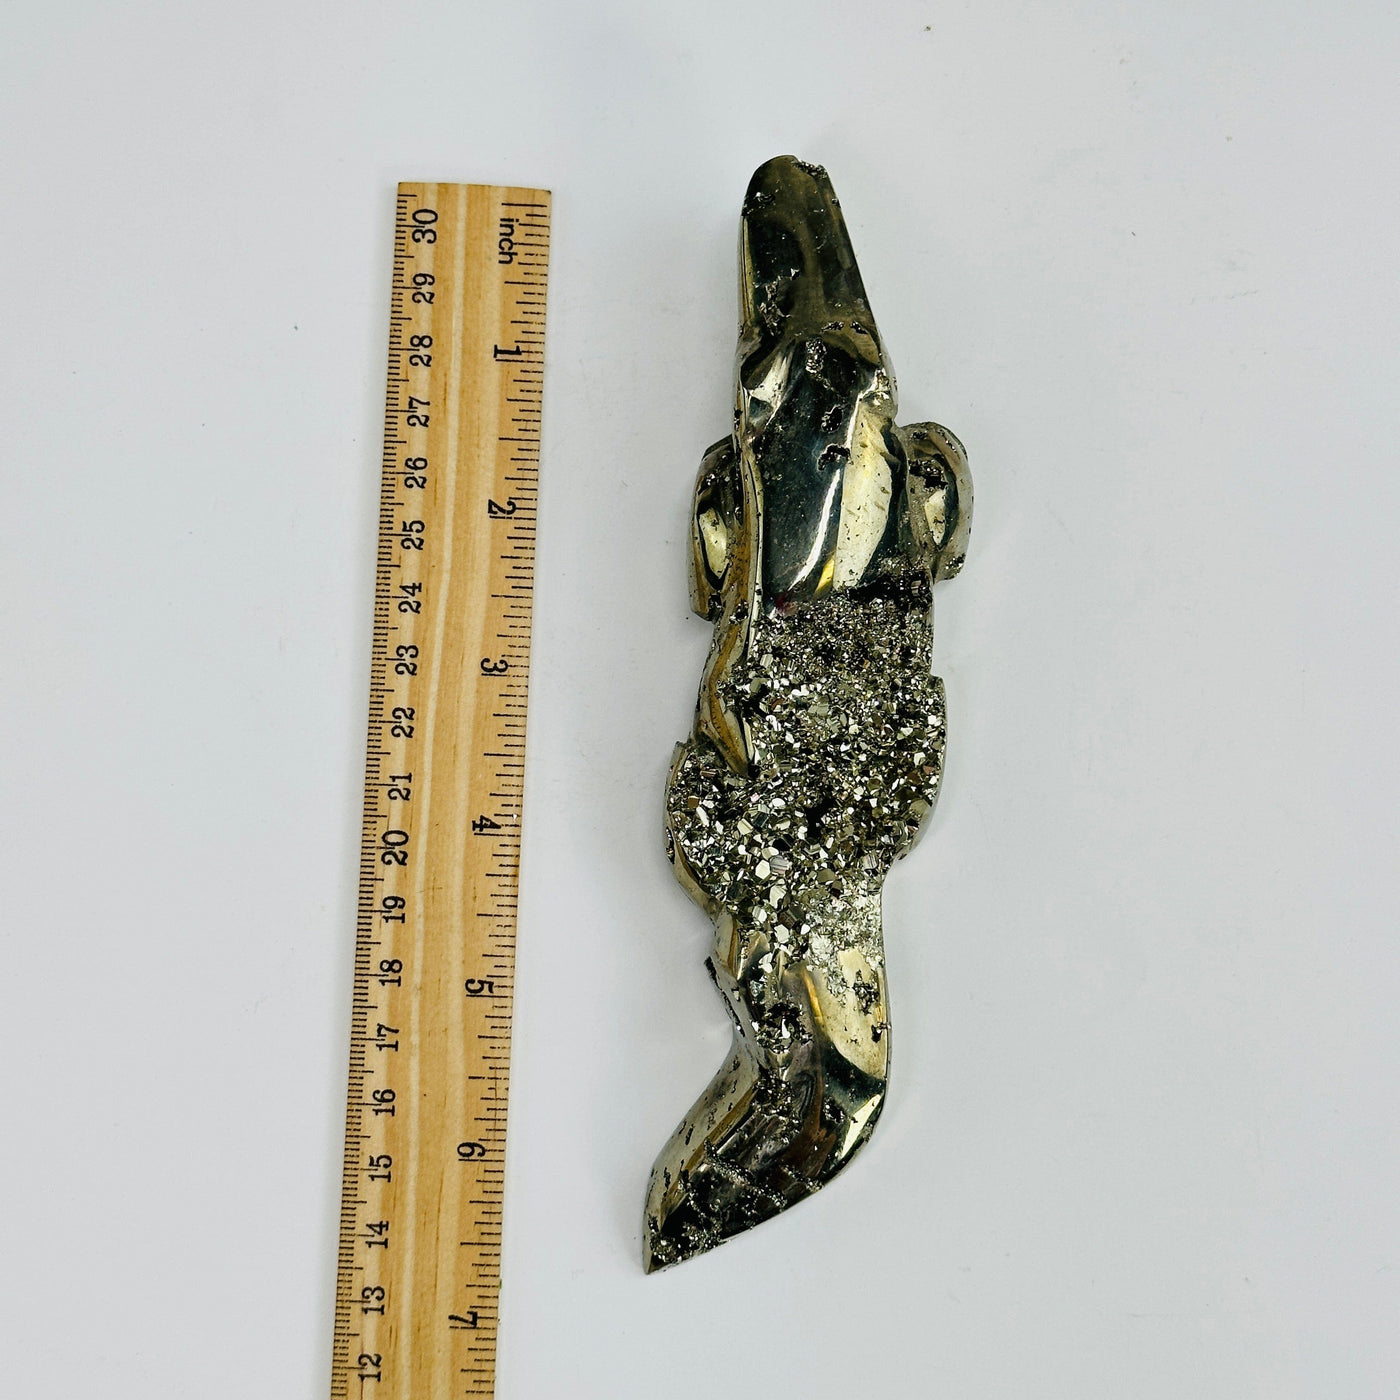 pyrite alligator next to a ruler for size reference